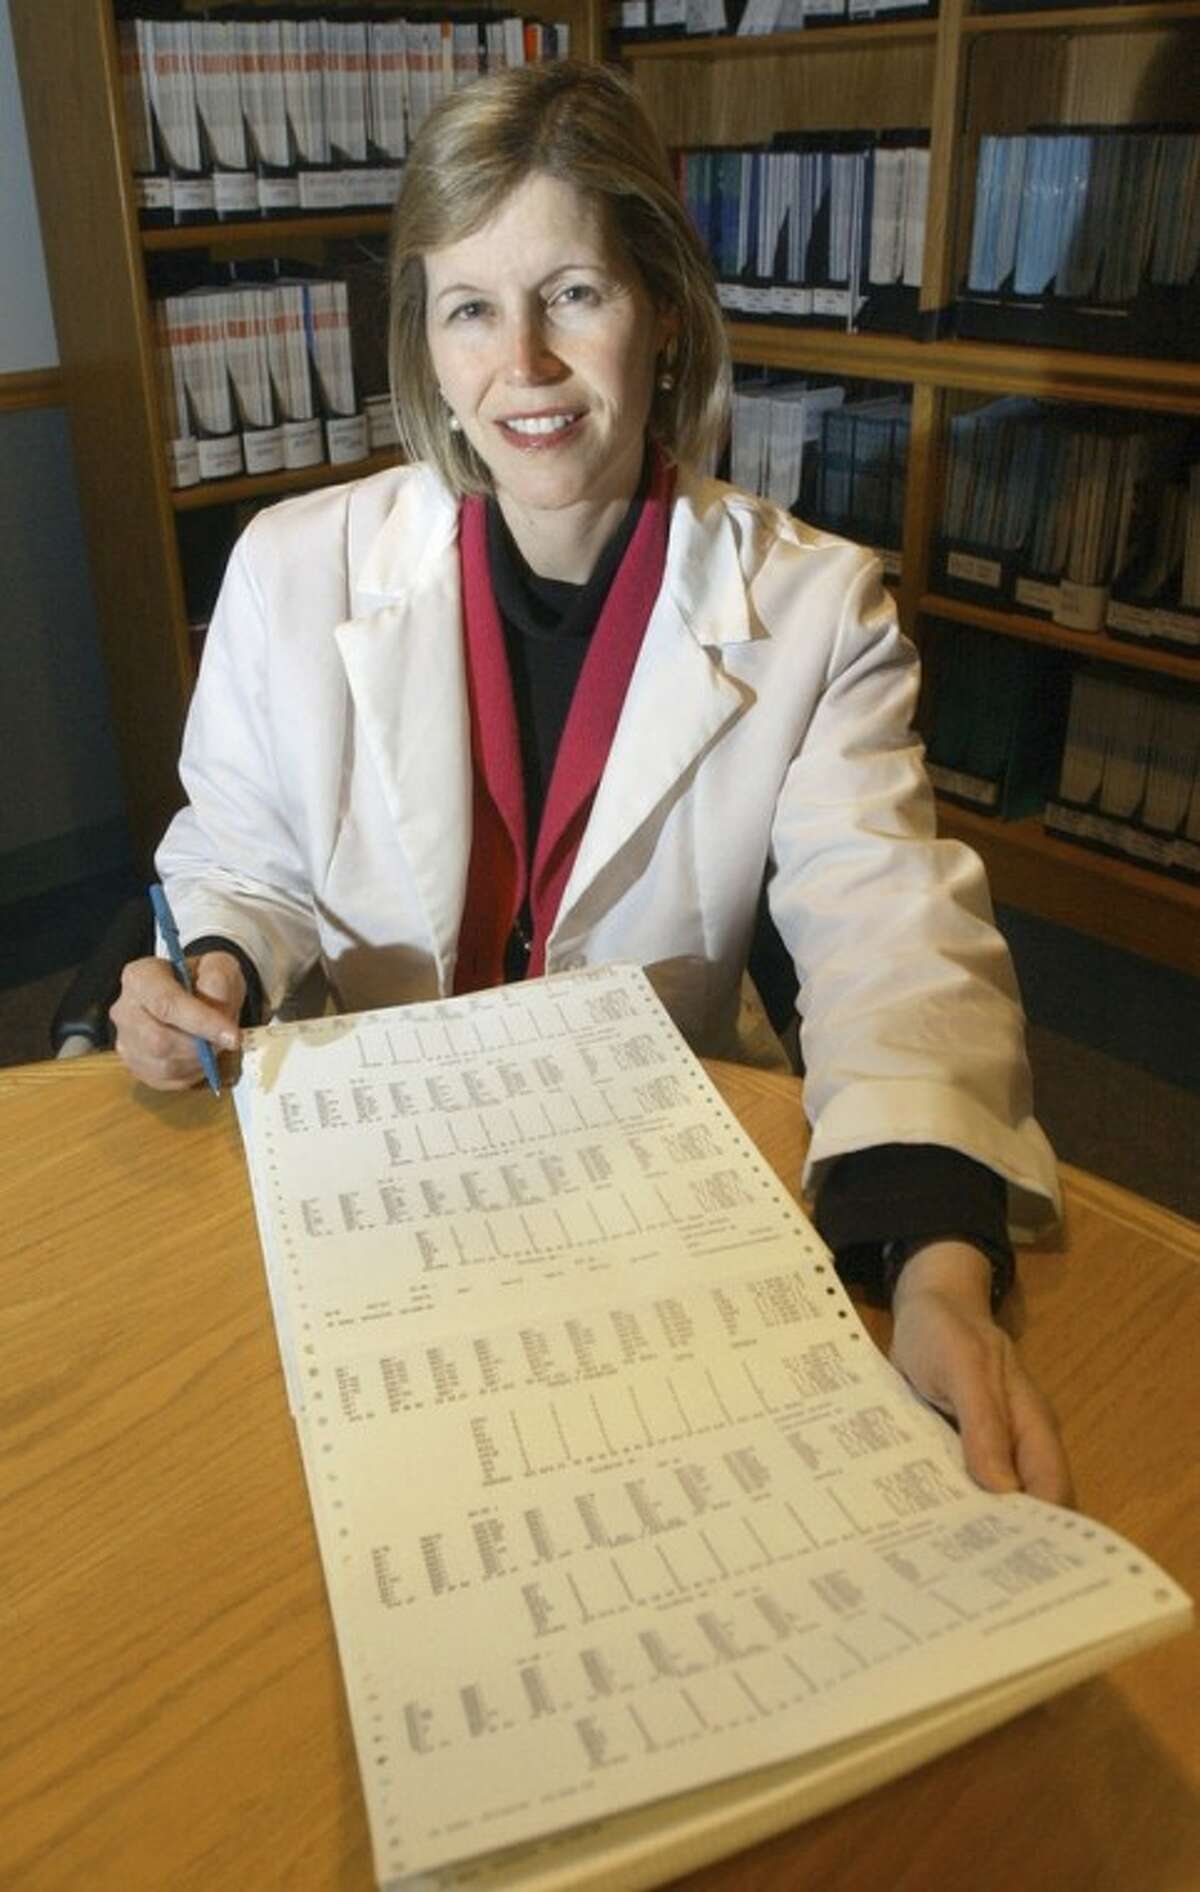 FILE - In this Dec. 12, 2002 file photo, Dr. JoAnn Manson poses for a photo in Boston. Manson, chief of preventive medicine at Harvard's Brigham and Women's Hospital, says women employees are less likely than men to ask her for pay raises, a phenomenon she says may explain results of a new study showing women doctor-researchers get paid substantially less than their male counterparts. The study involving 800 doctors nationwide appears Wednesday, June 12, 2012, in Journal of the American Medical Association. (AP Photo/Elise Amendola, File)